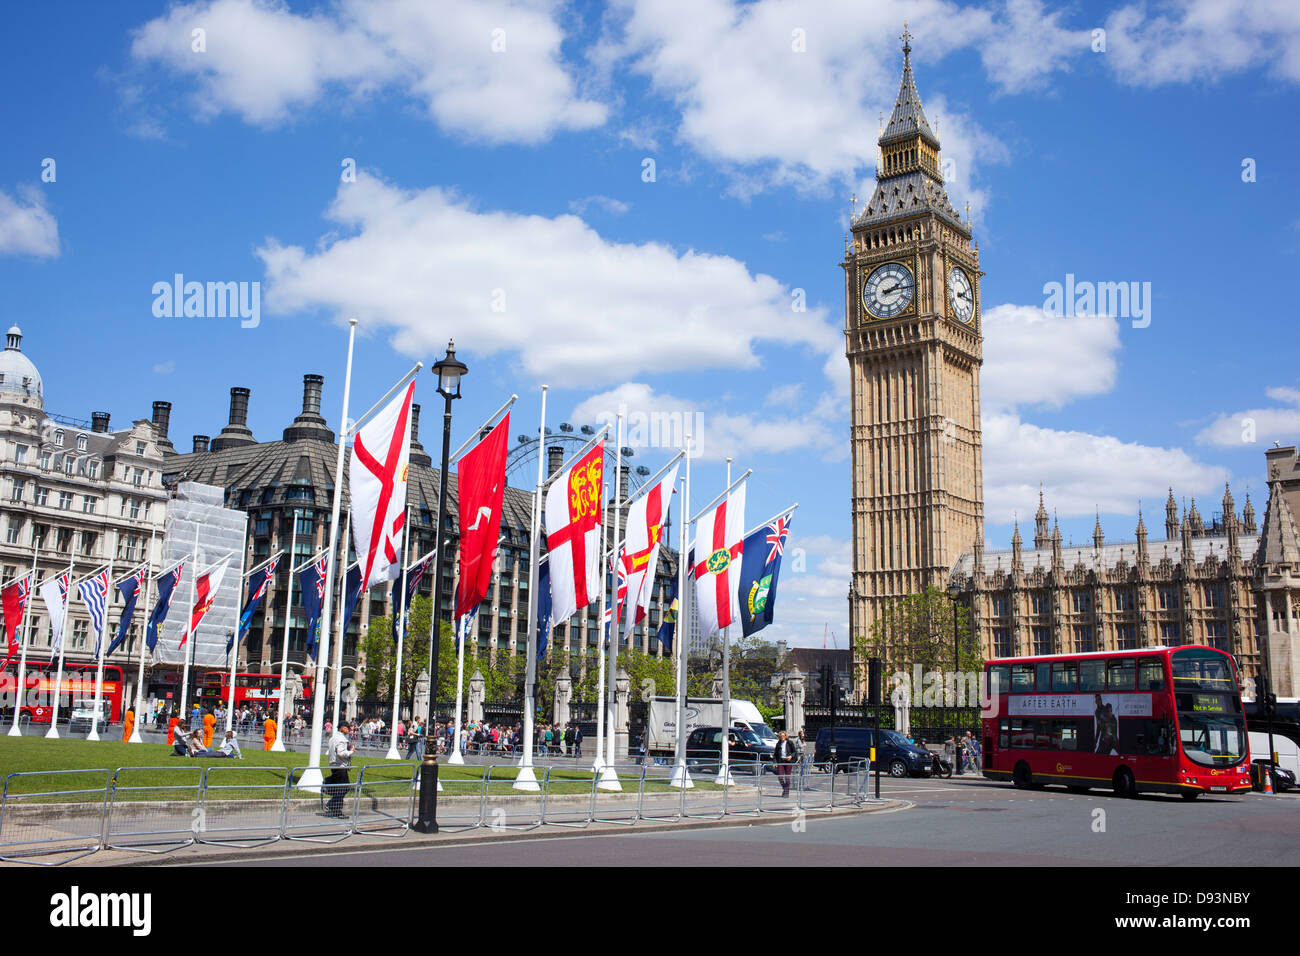 Flags of Her Majesty's Crown Dependencies and Overseas Territories, Parliament Square and Big Ben, London England. Stock Photo